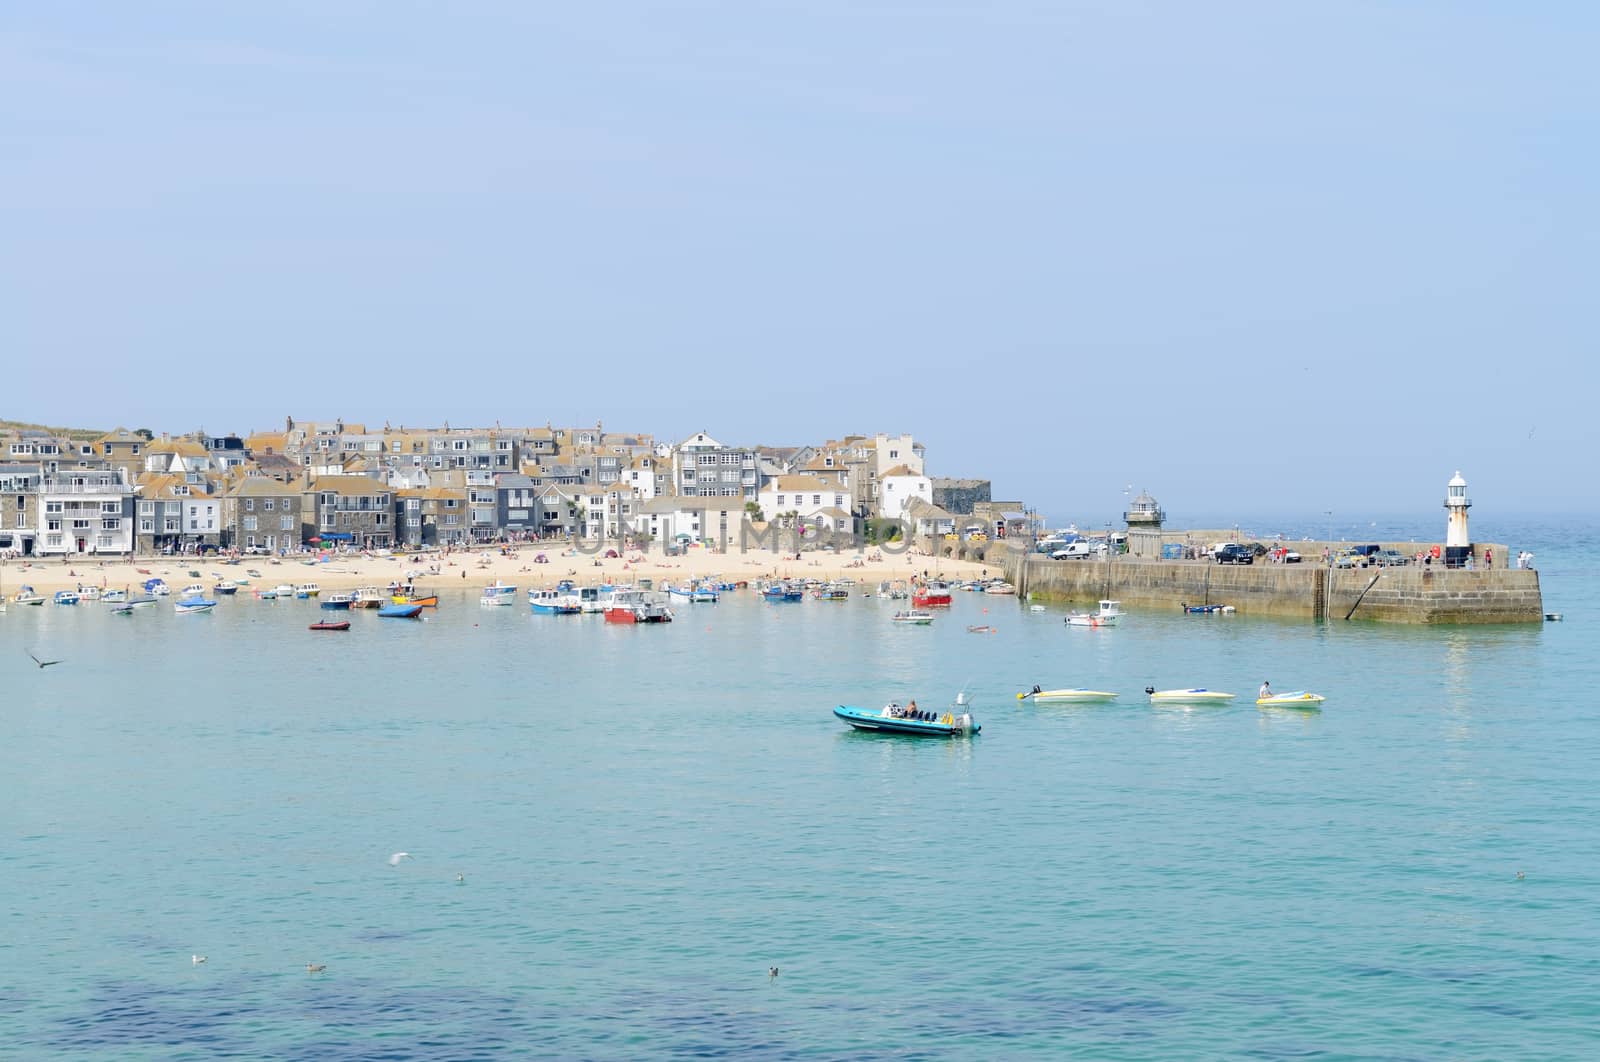 Seaside harbour showing fishing boats and lighthouse in St Ives, Cornwall, England